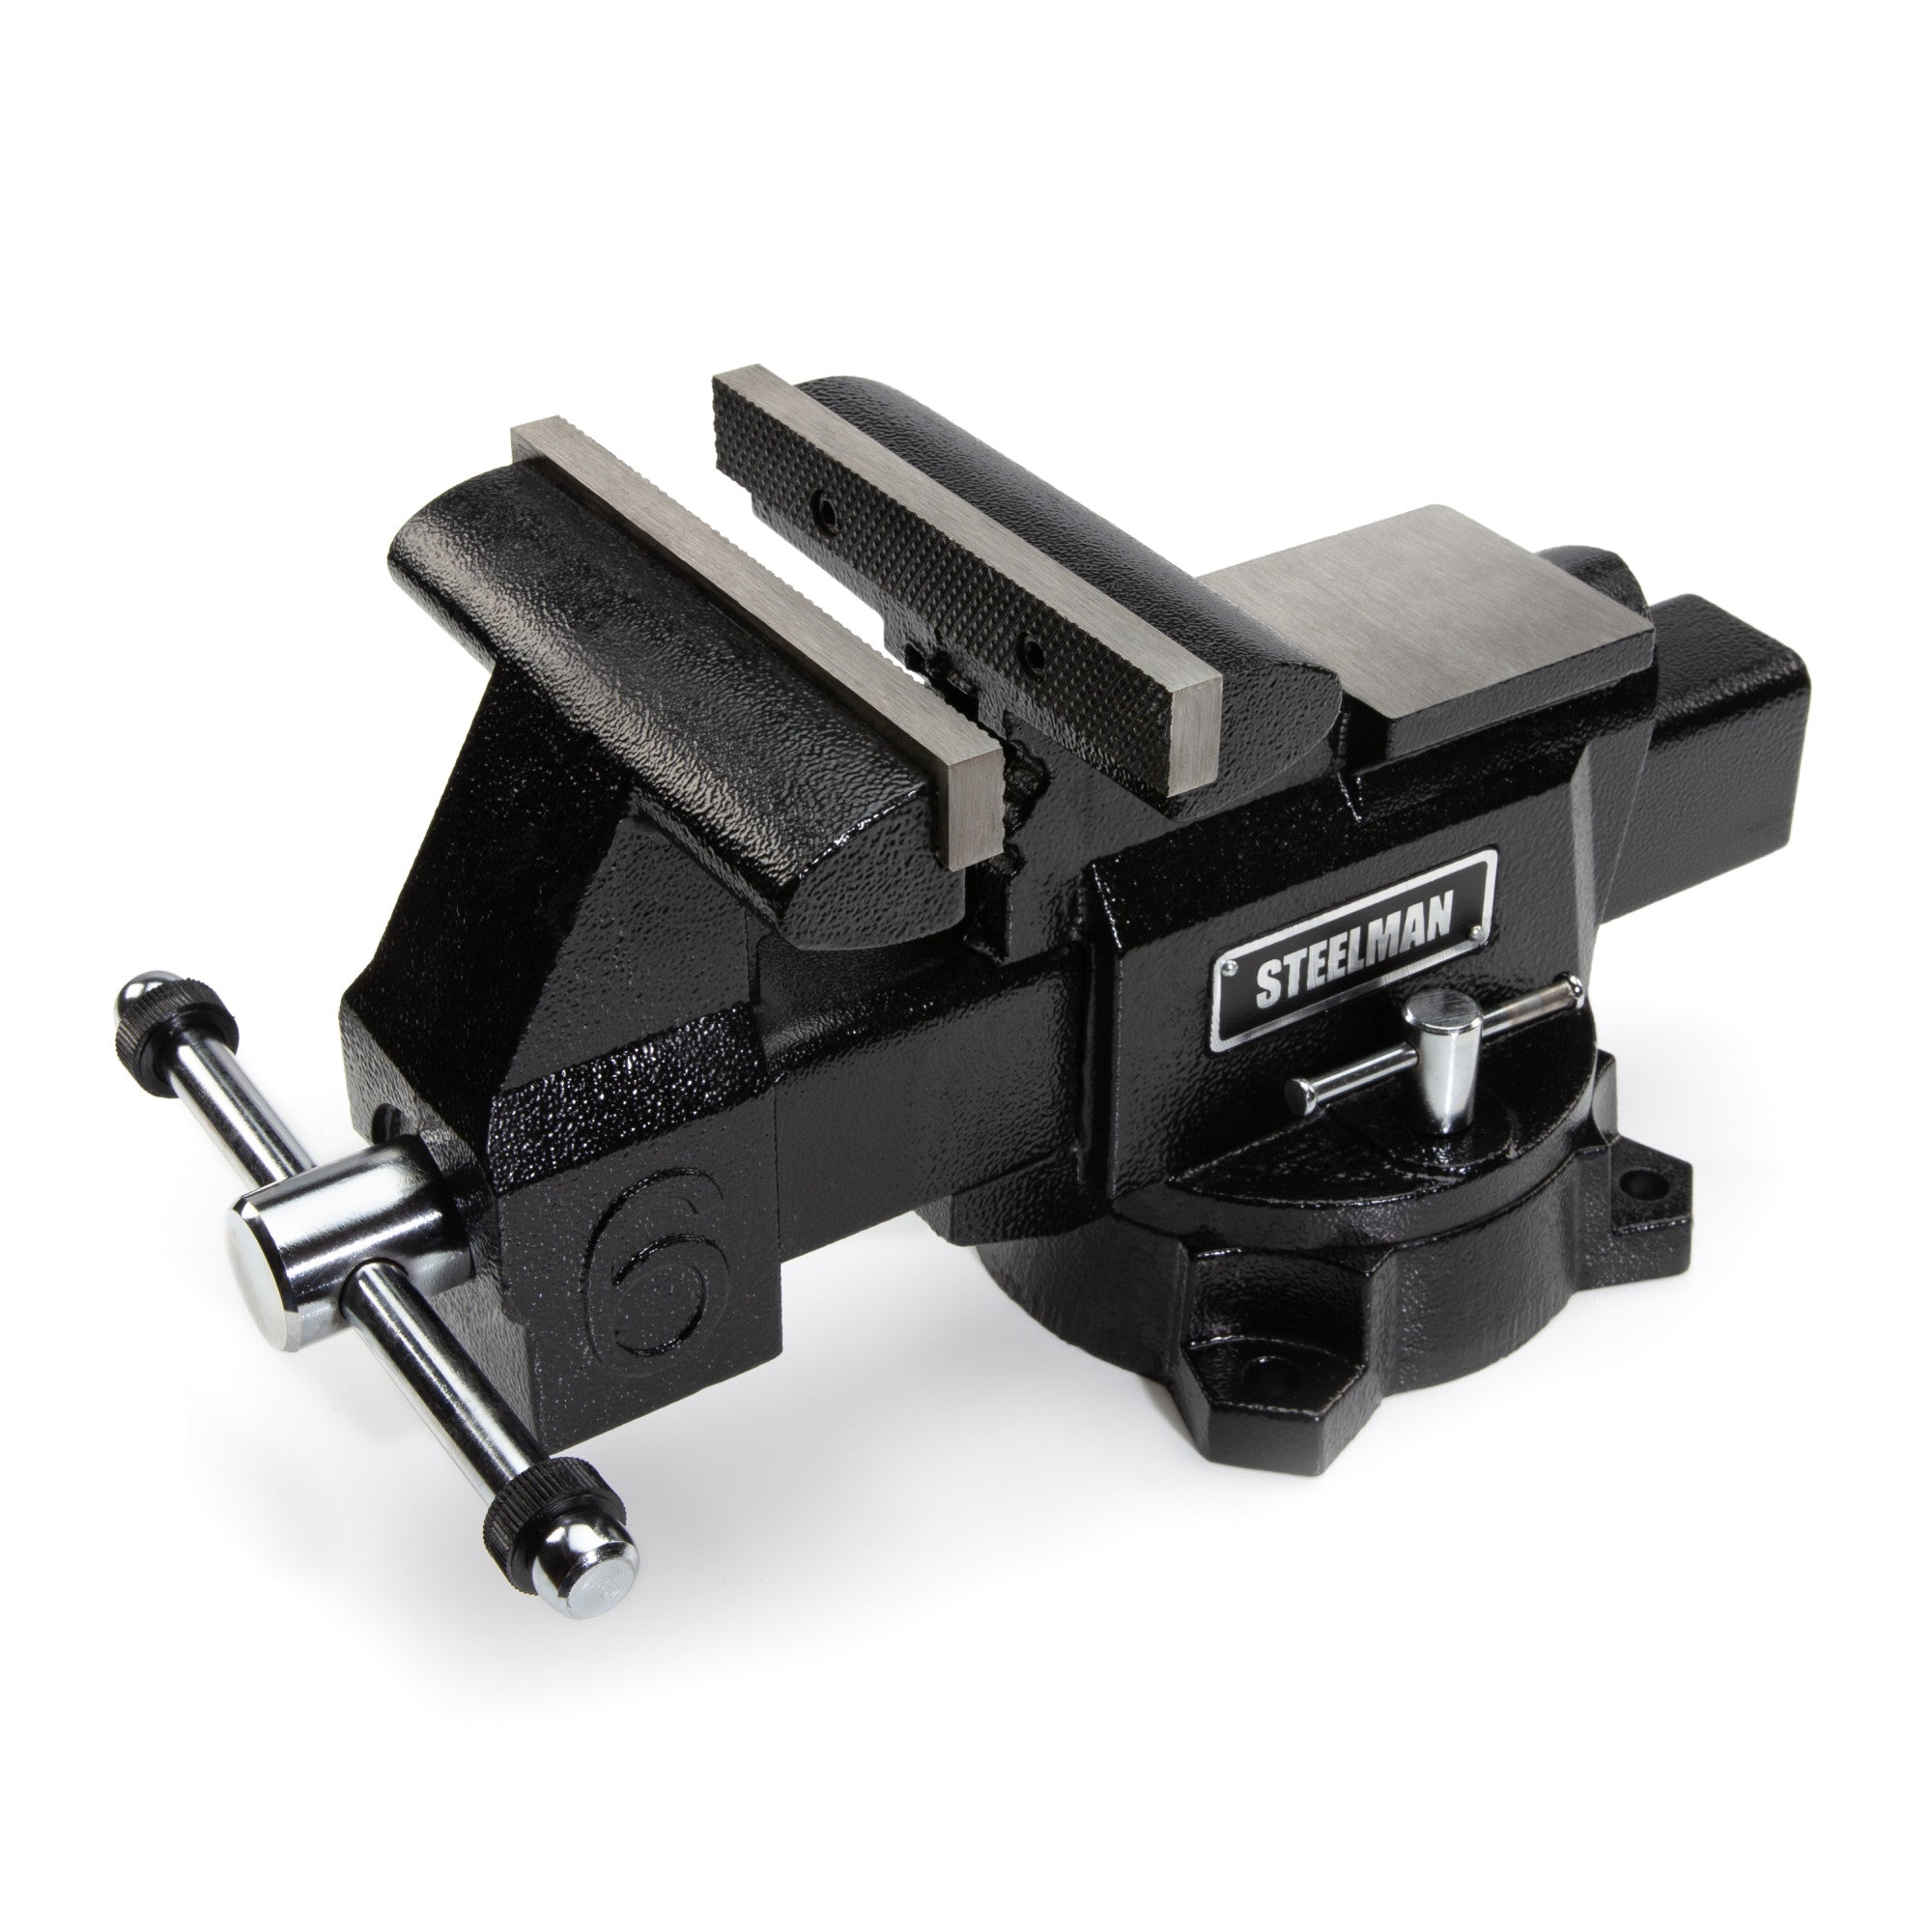 Steelman 6-Inch Swivel Base Bench And Vise With Built-In Anvil